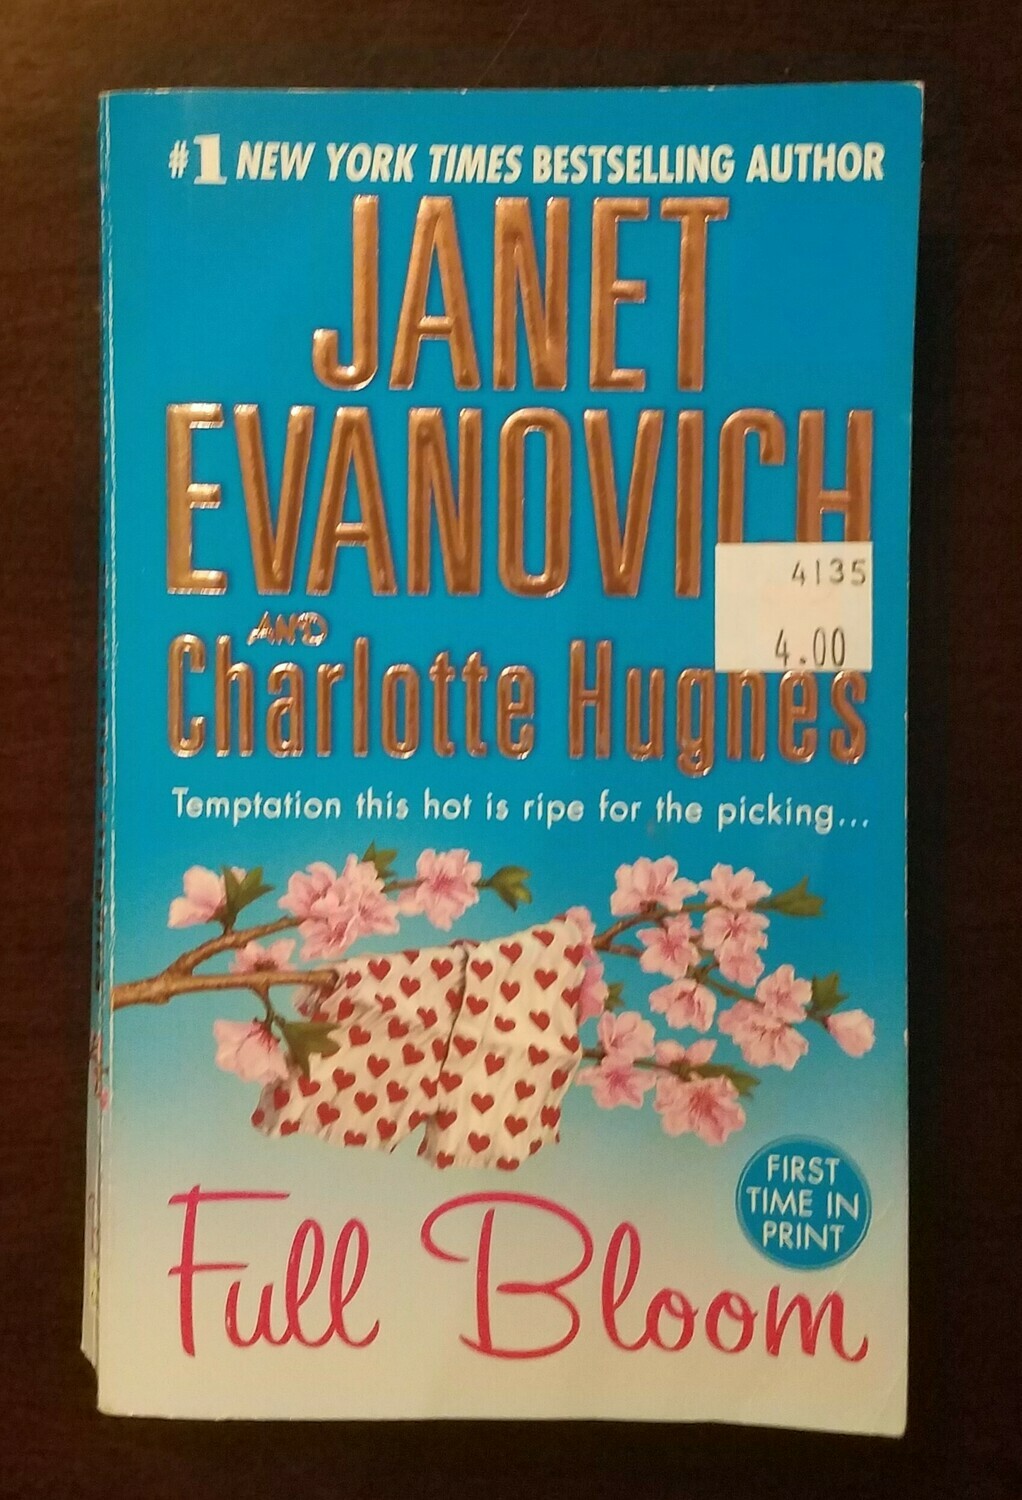 Full Bloom by Janet Evanovich and Charlotte Hughes